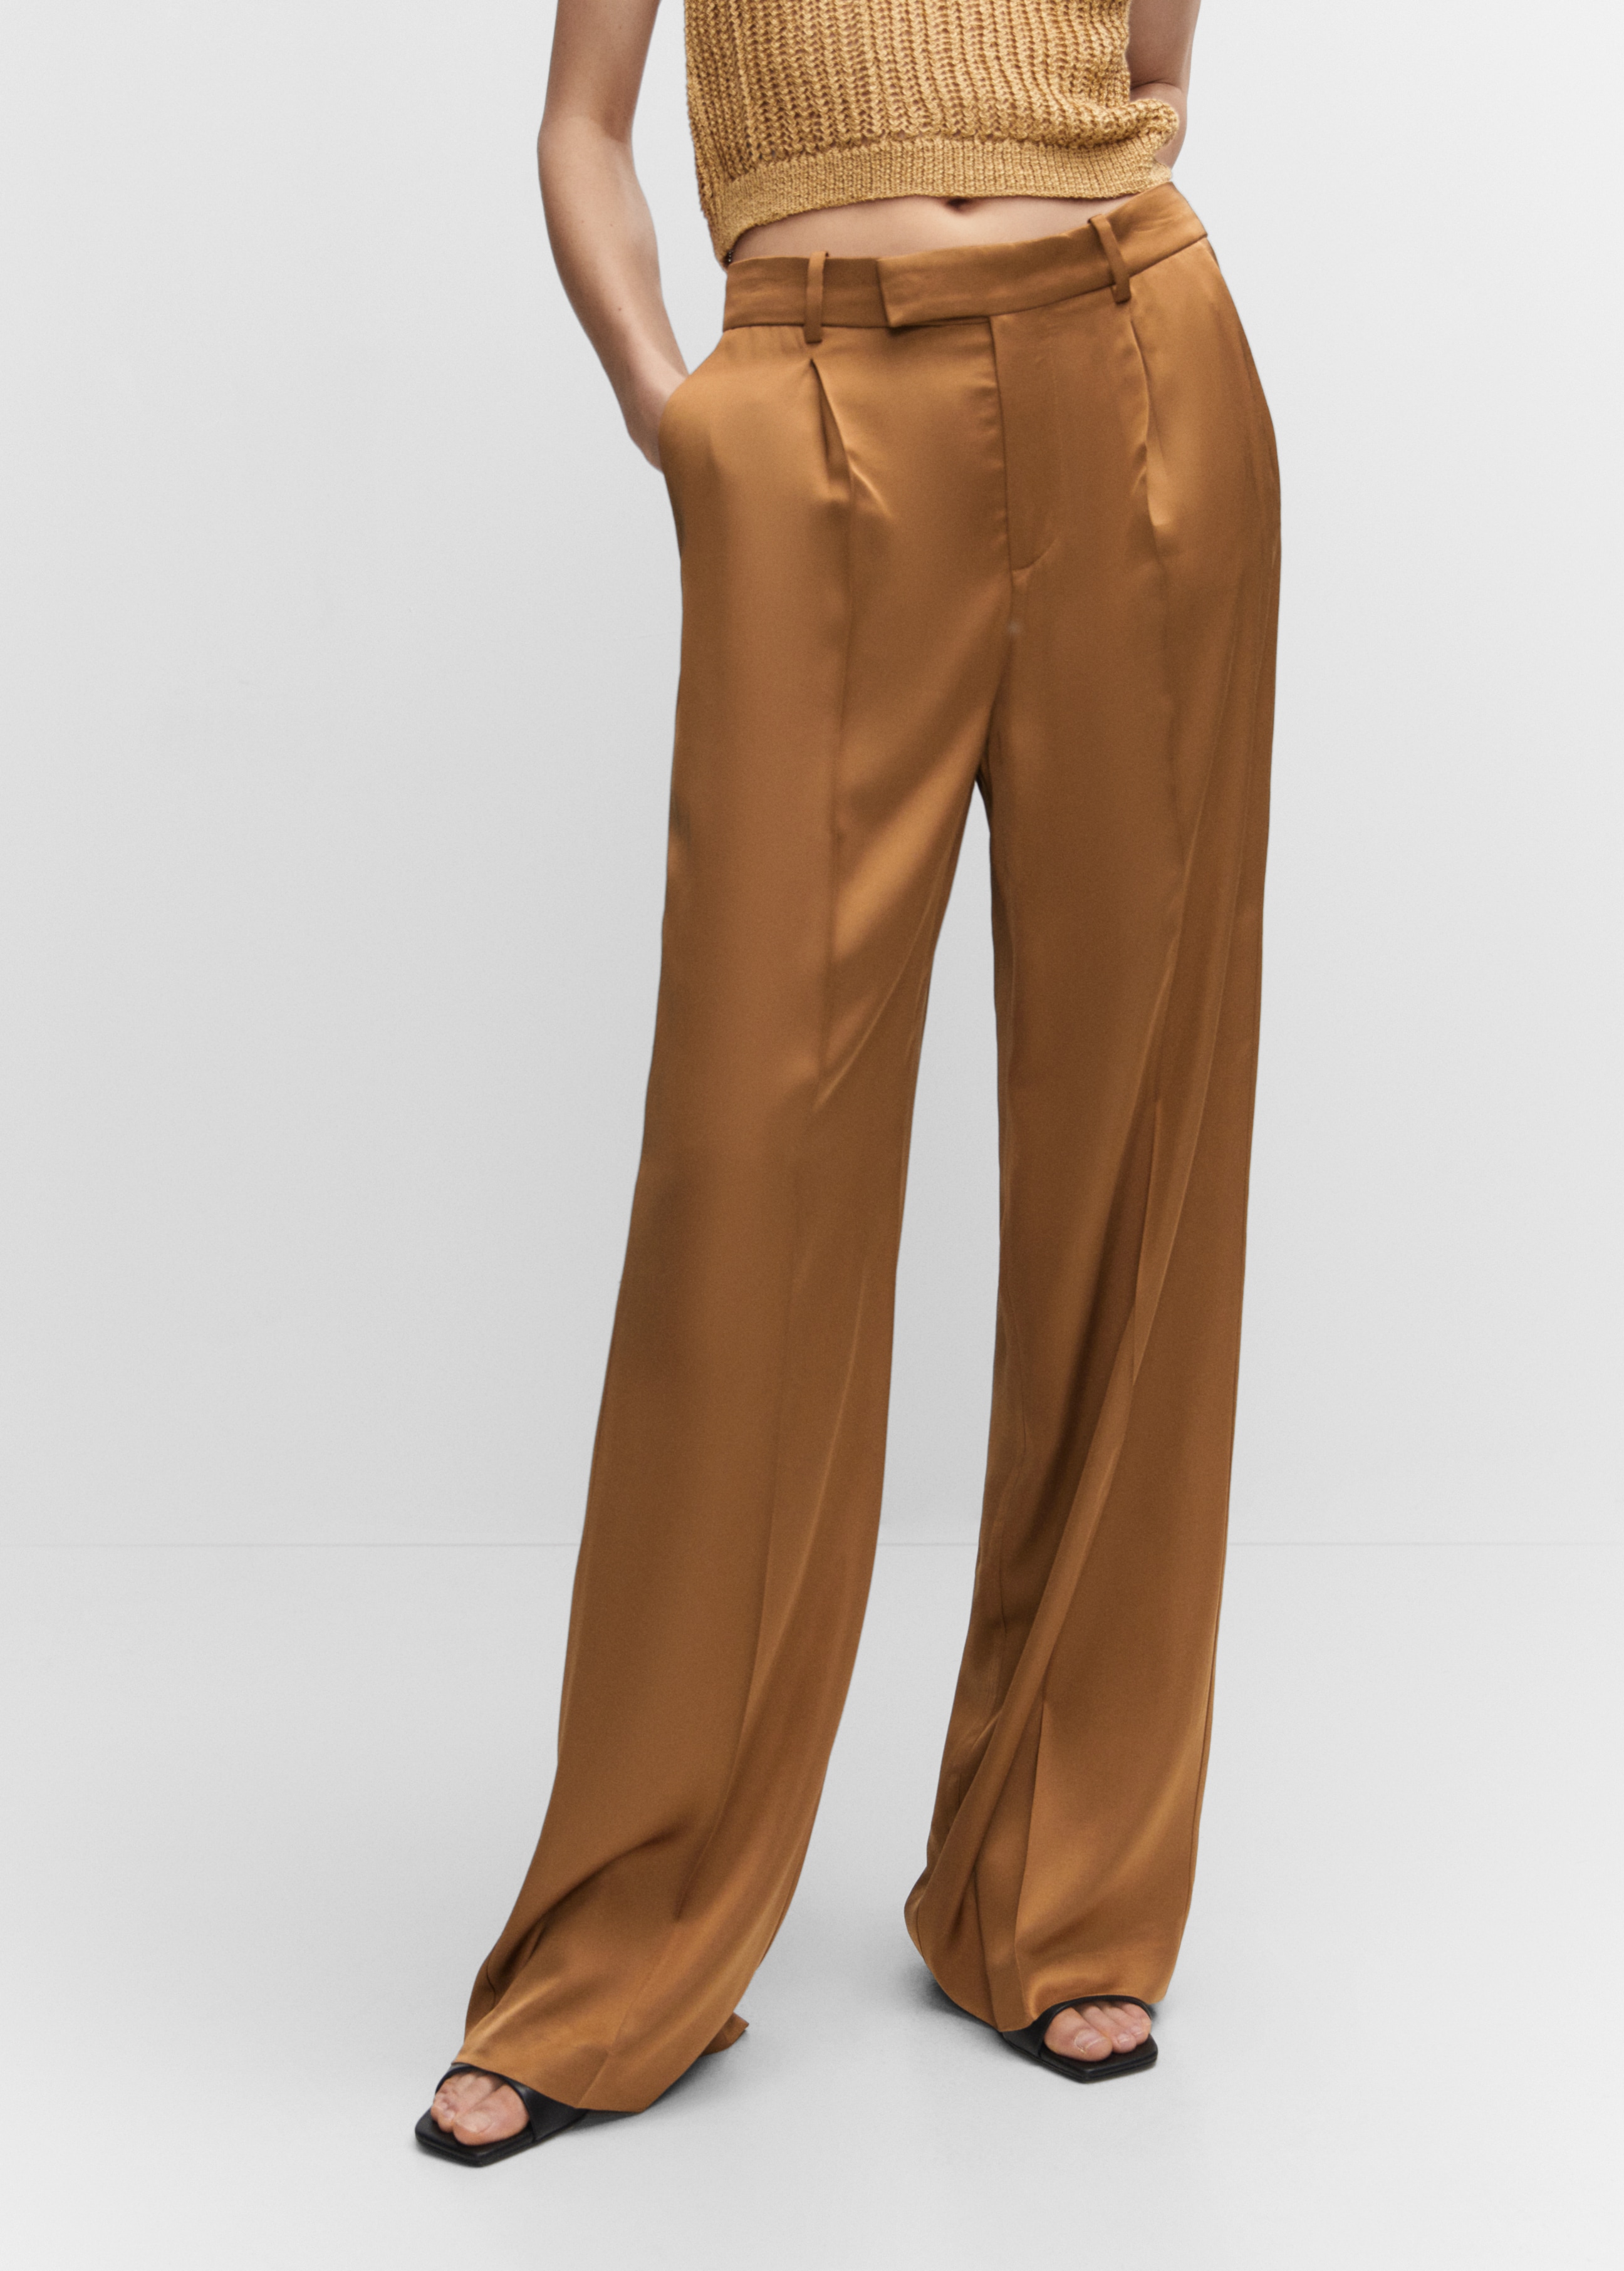 Satin-finish trousers with pleat detail